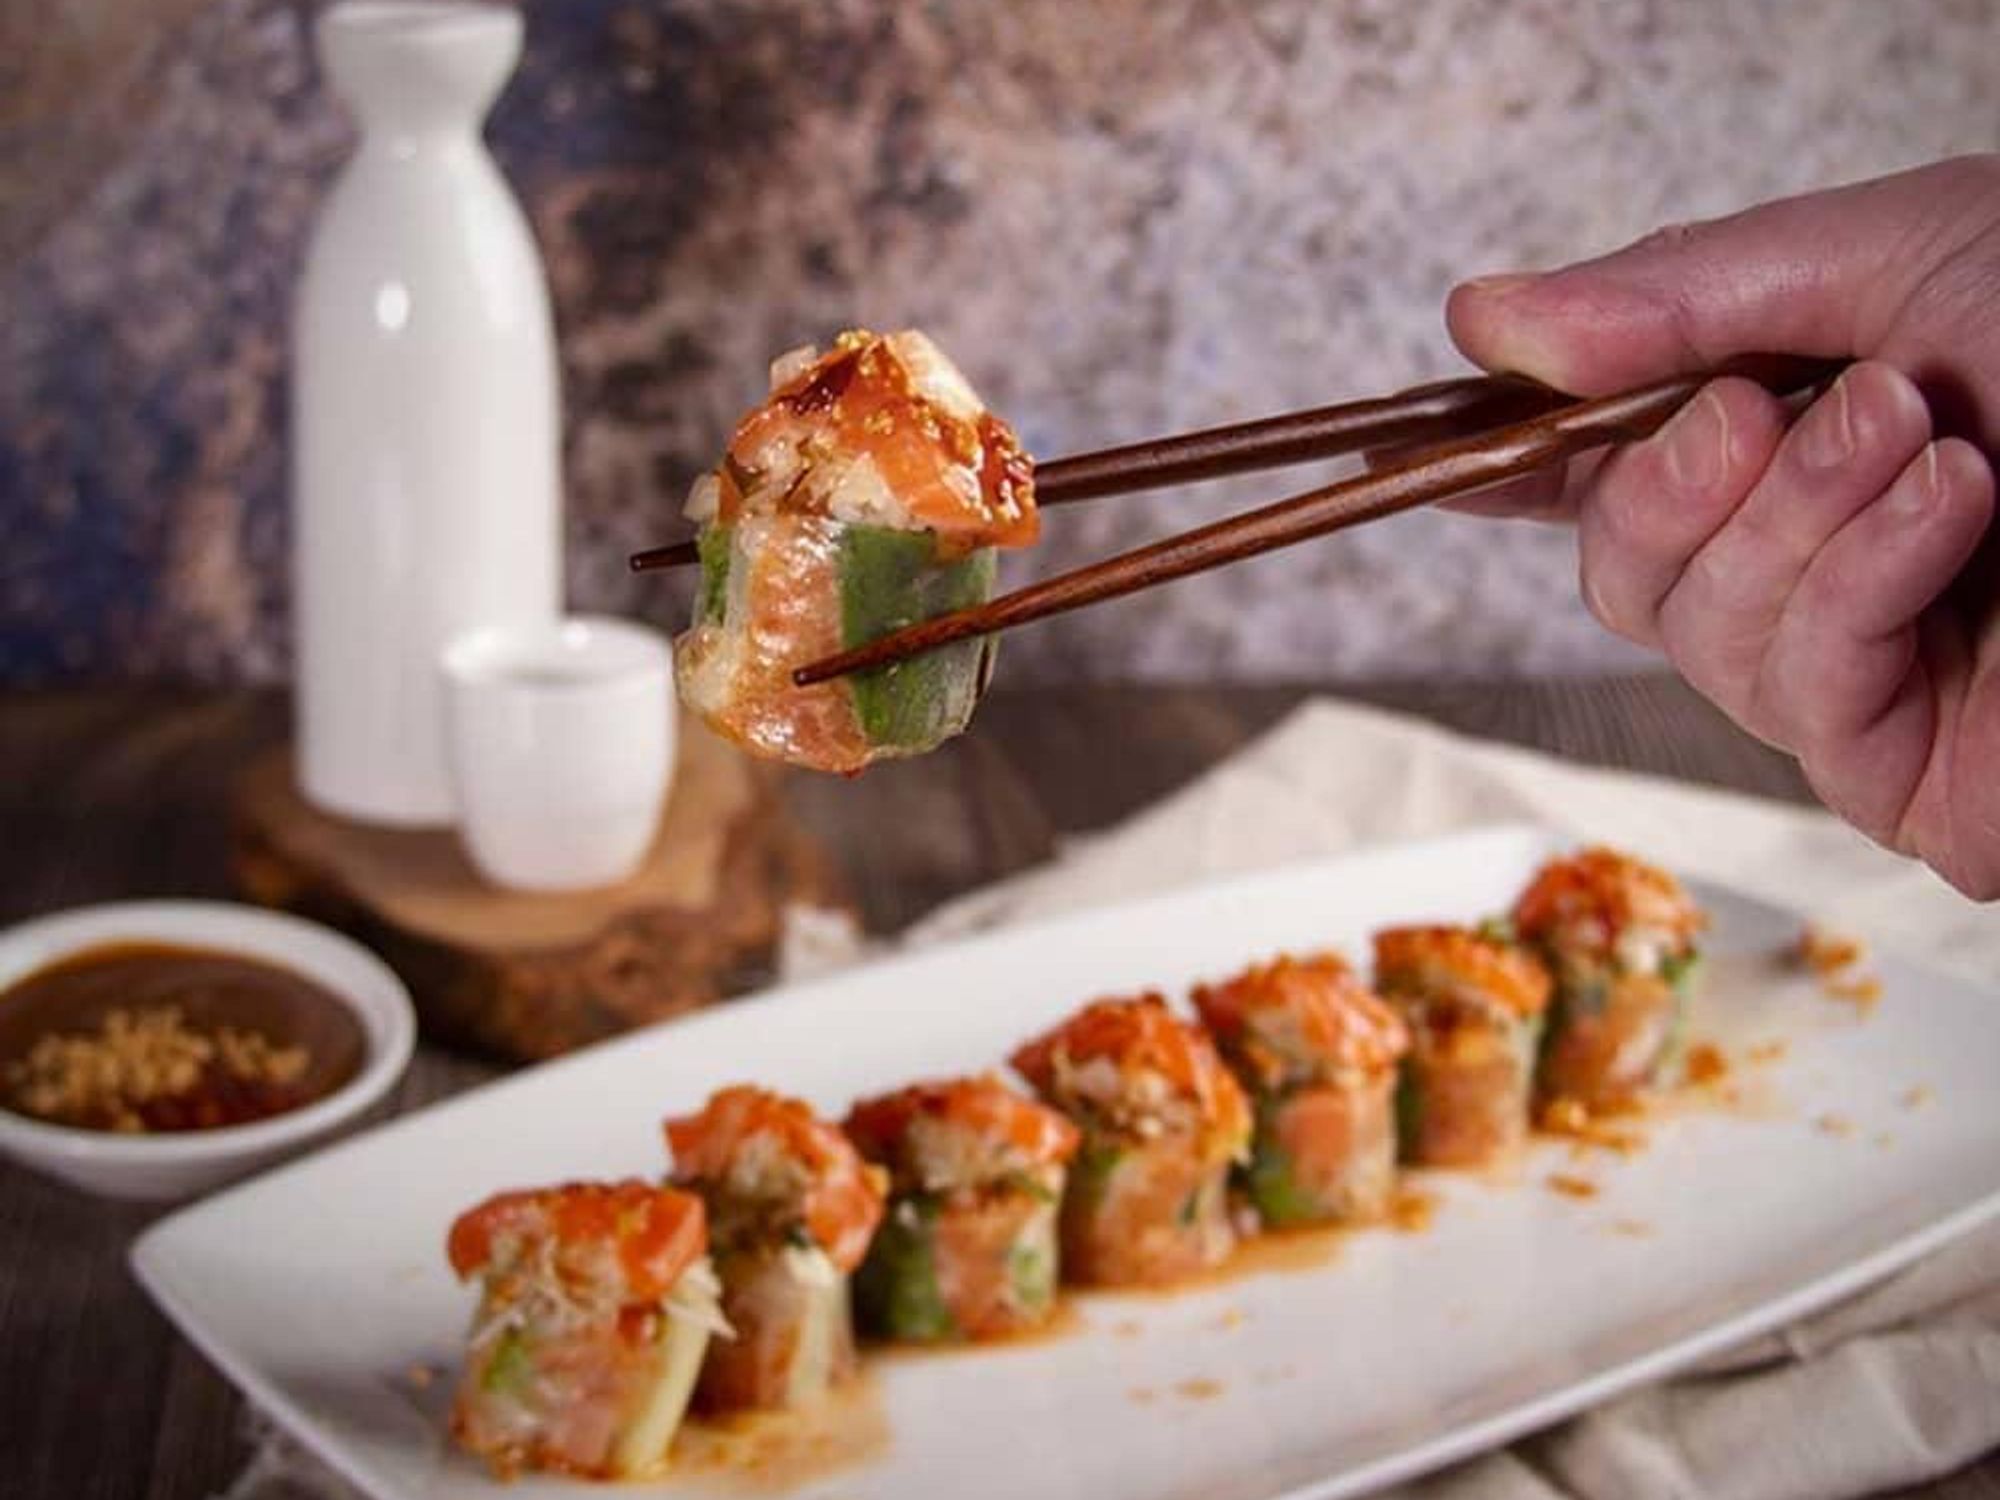 Dallas sushi gem Oishii gives Plano what it craves: its own location -  CultureMap Dallas